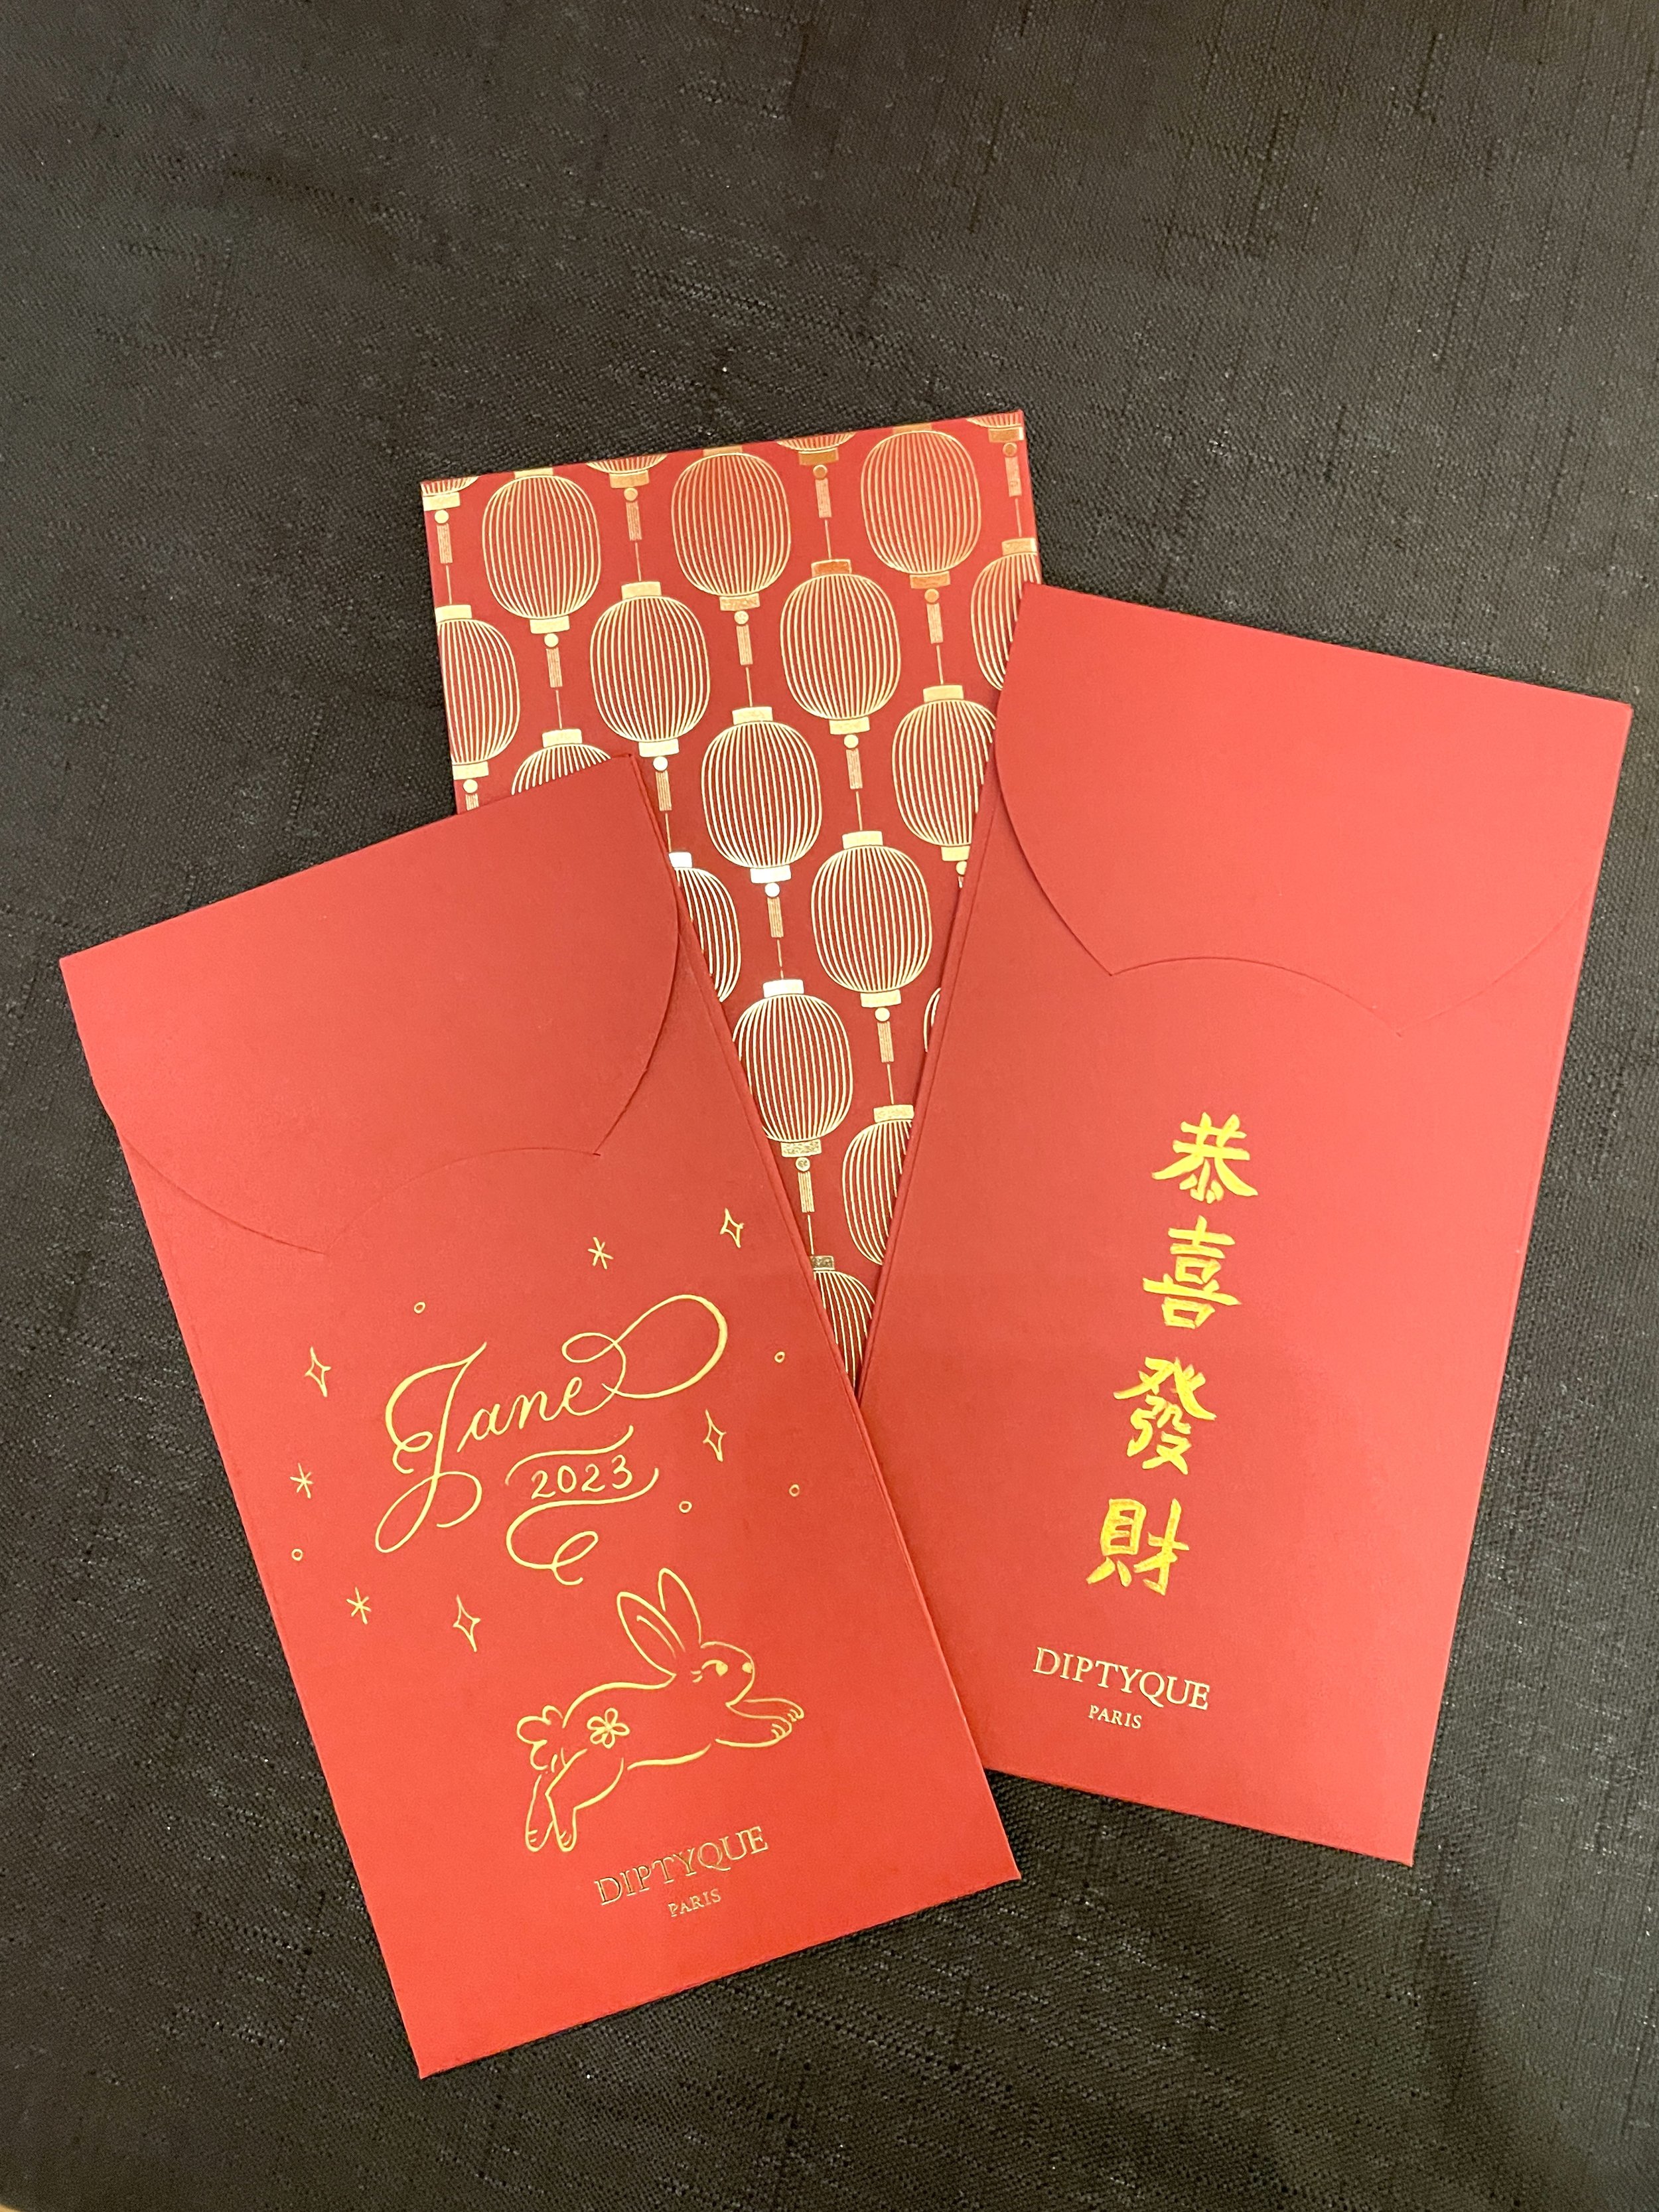 Personalized Red Envelopes - Diptyque (SCP)